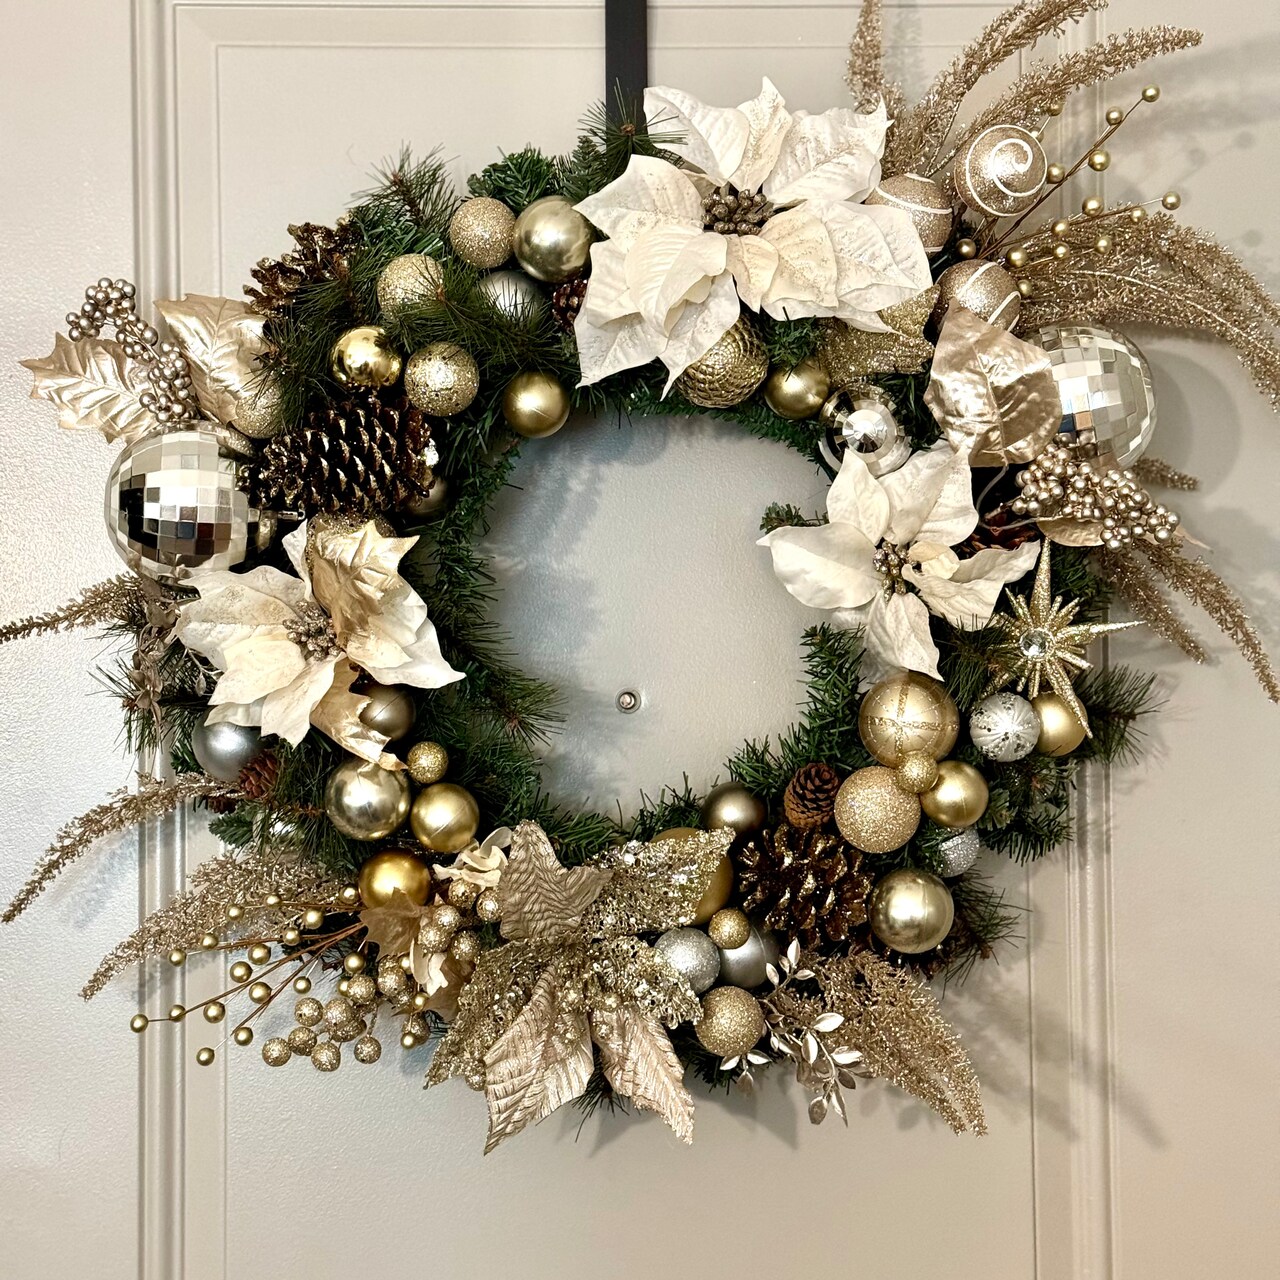 Homemade Holiday Wreath Craft Featuring Krazy Glue